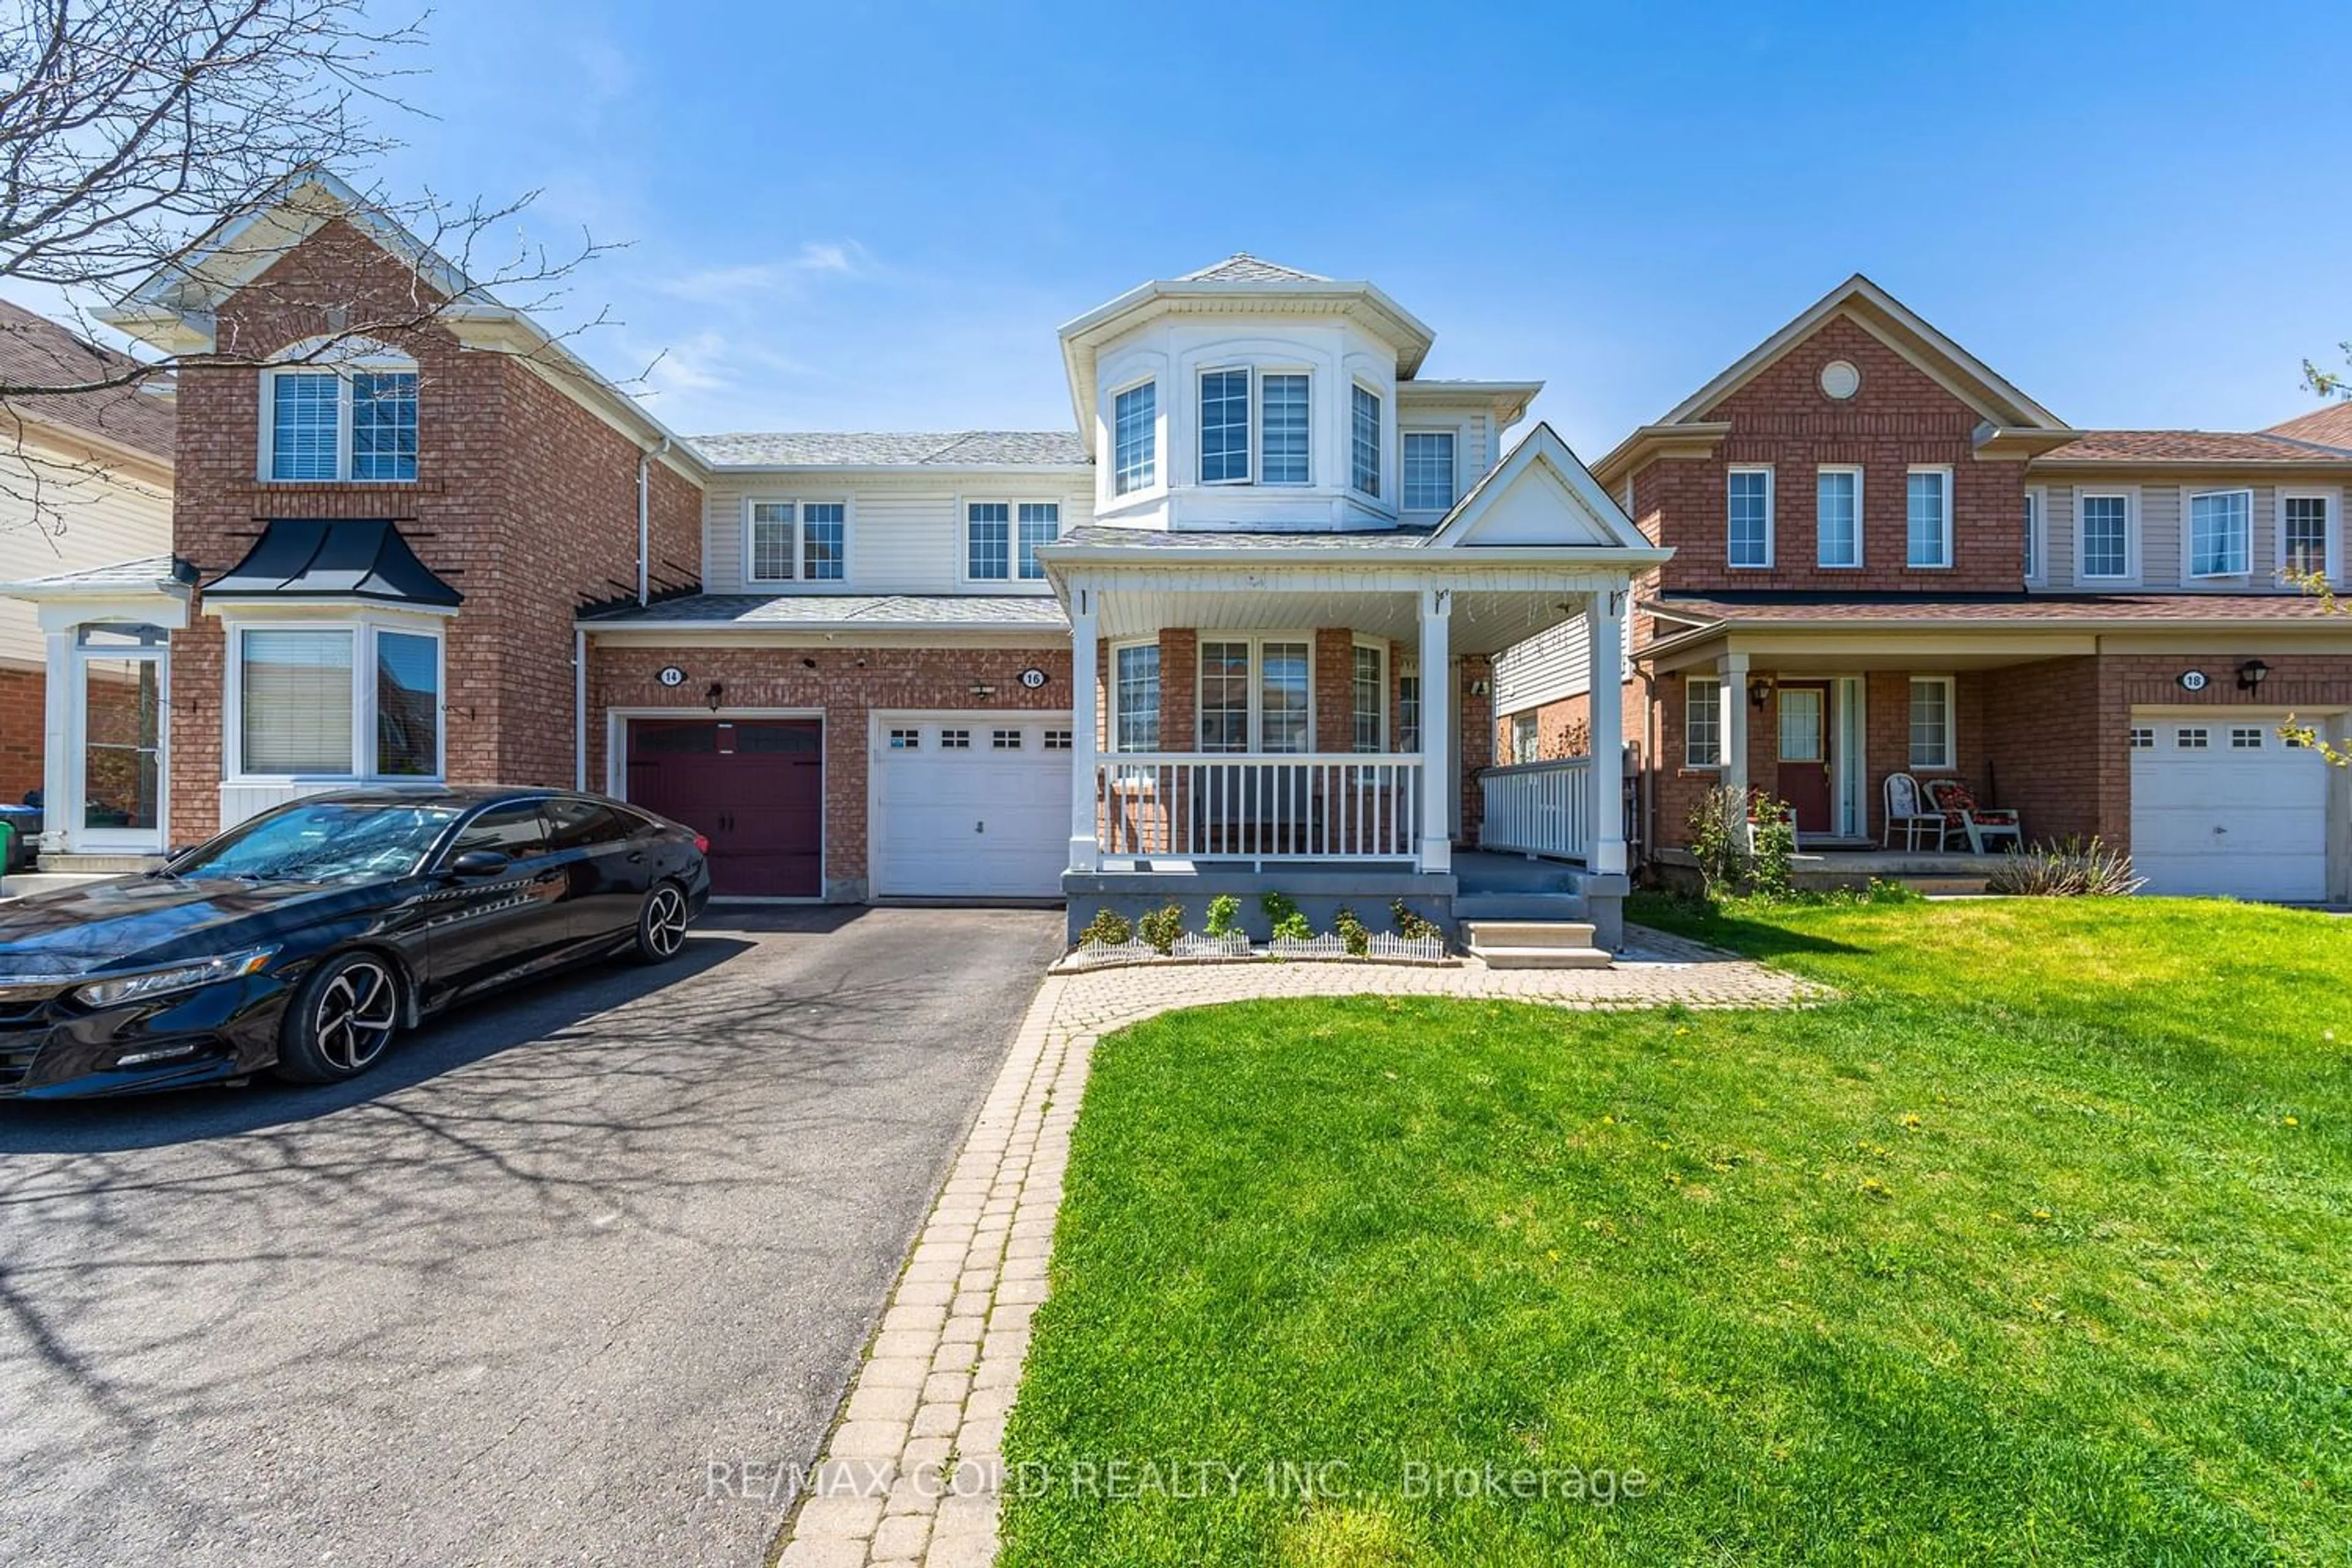 Frontside or backside of a home for 16 Frontenac Cres, Brampton Ontario L7A 3M7